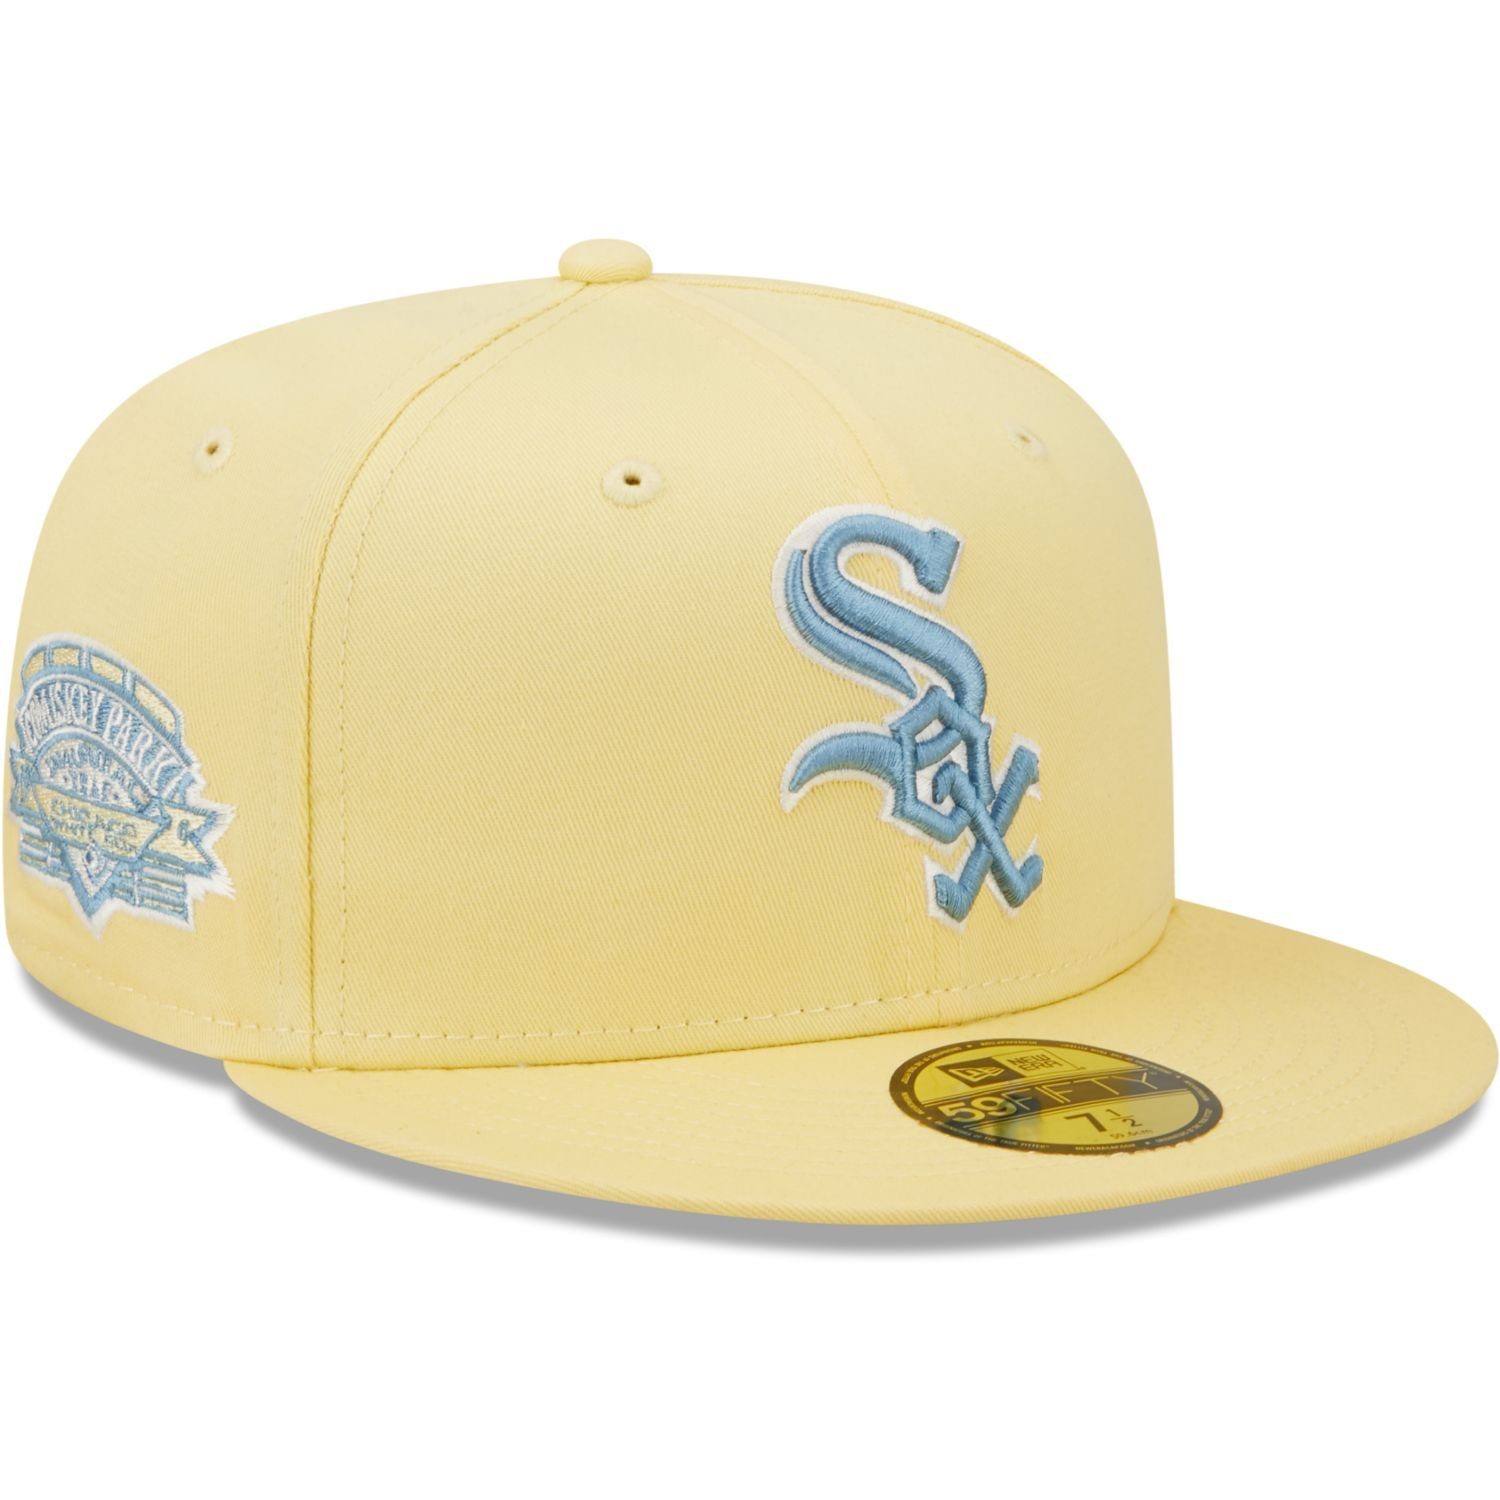 Era Chicago New COOPERSTOWN Fitted Sox 59Fifty Cap White